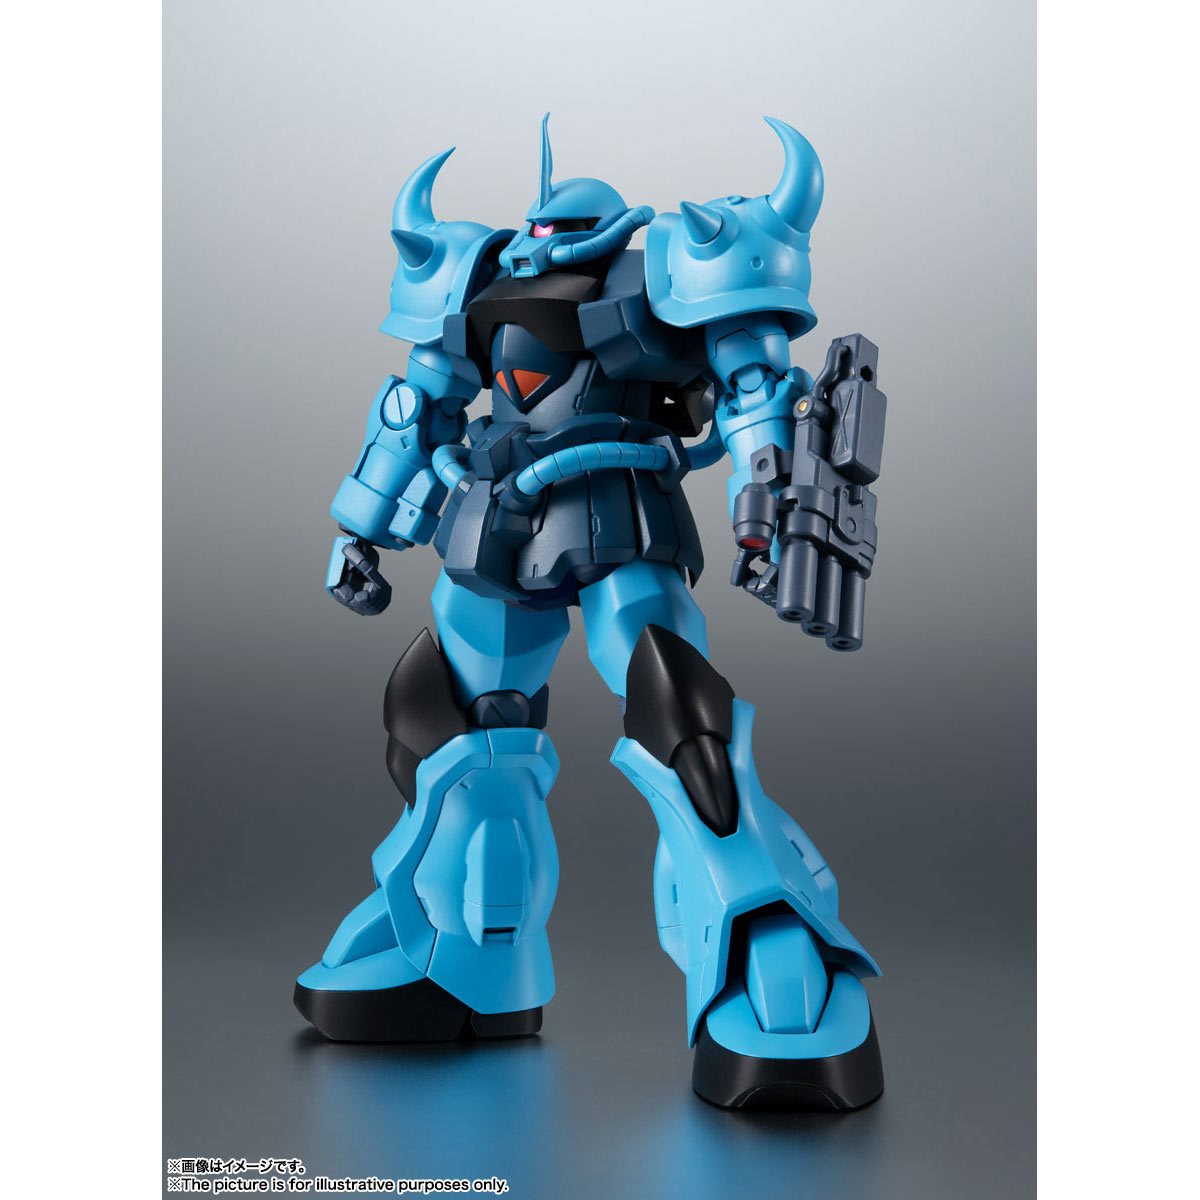 Bandai MSIA The 08 MS Teeam Ms-07b-3 Gouf Custom Action Figure a for sale online